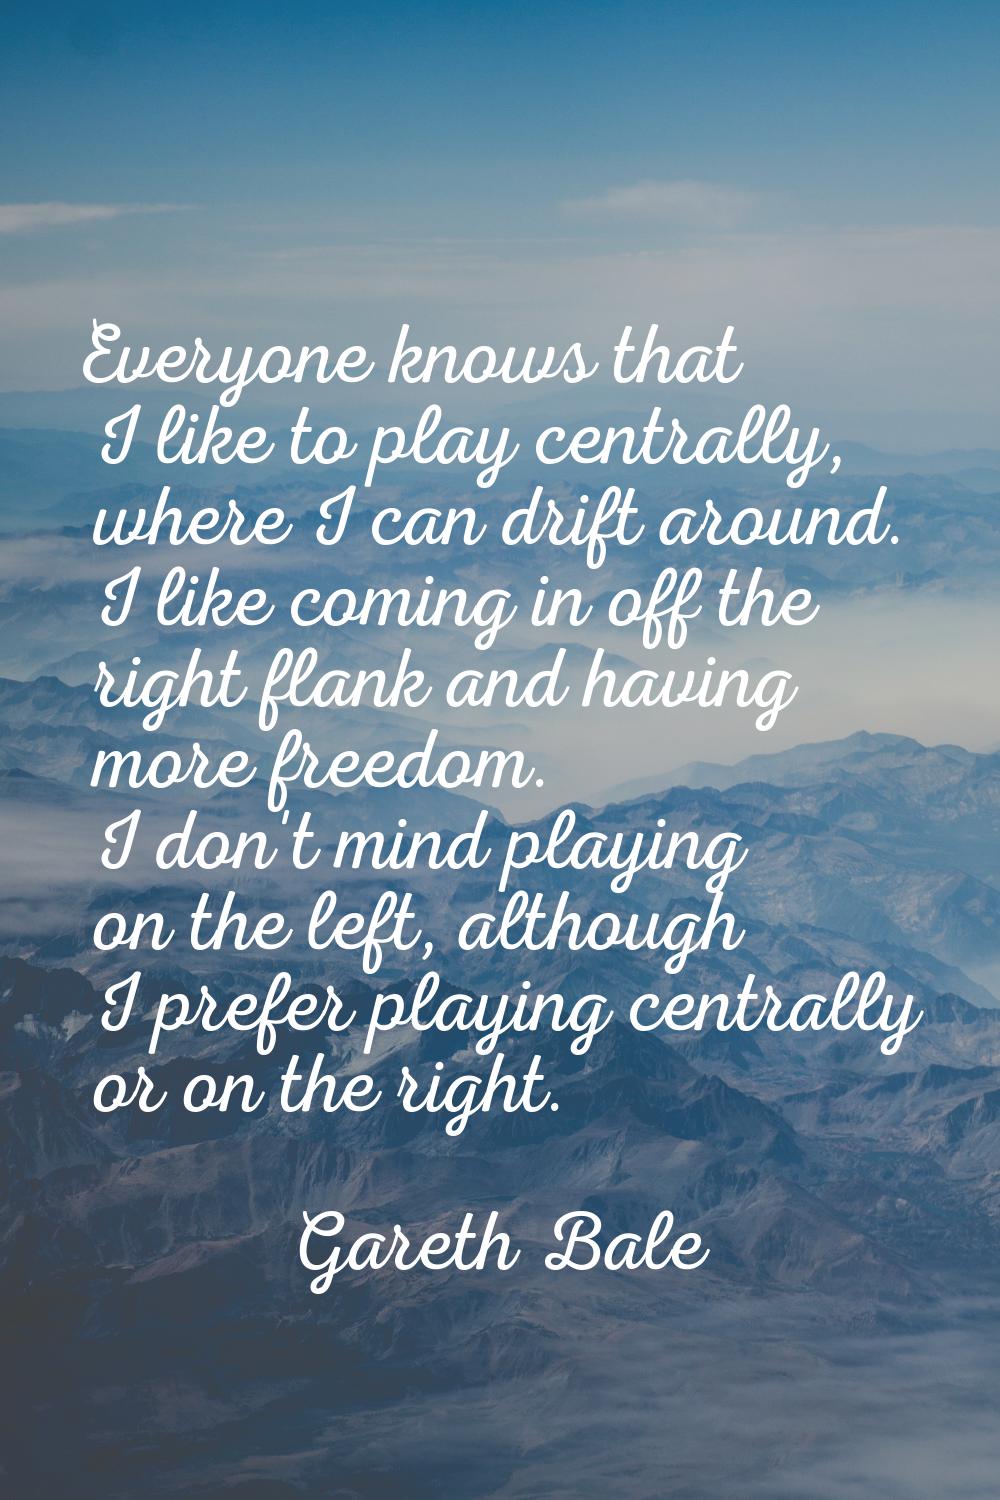 Everyone knows that I like to play centrally, where I can drift around. I like coming in off the ri